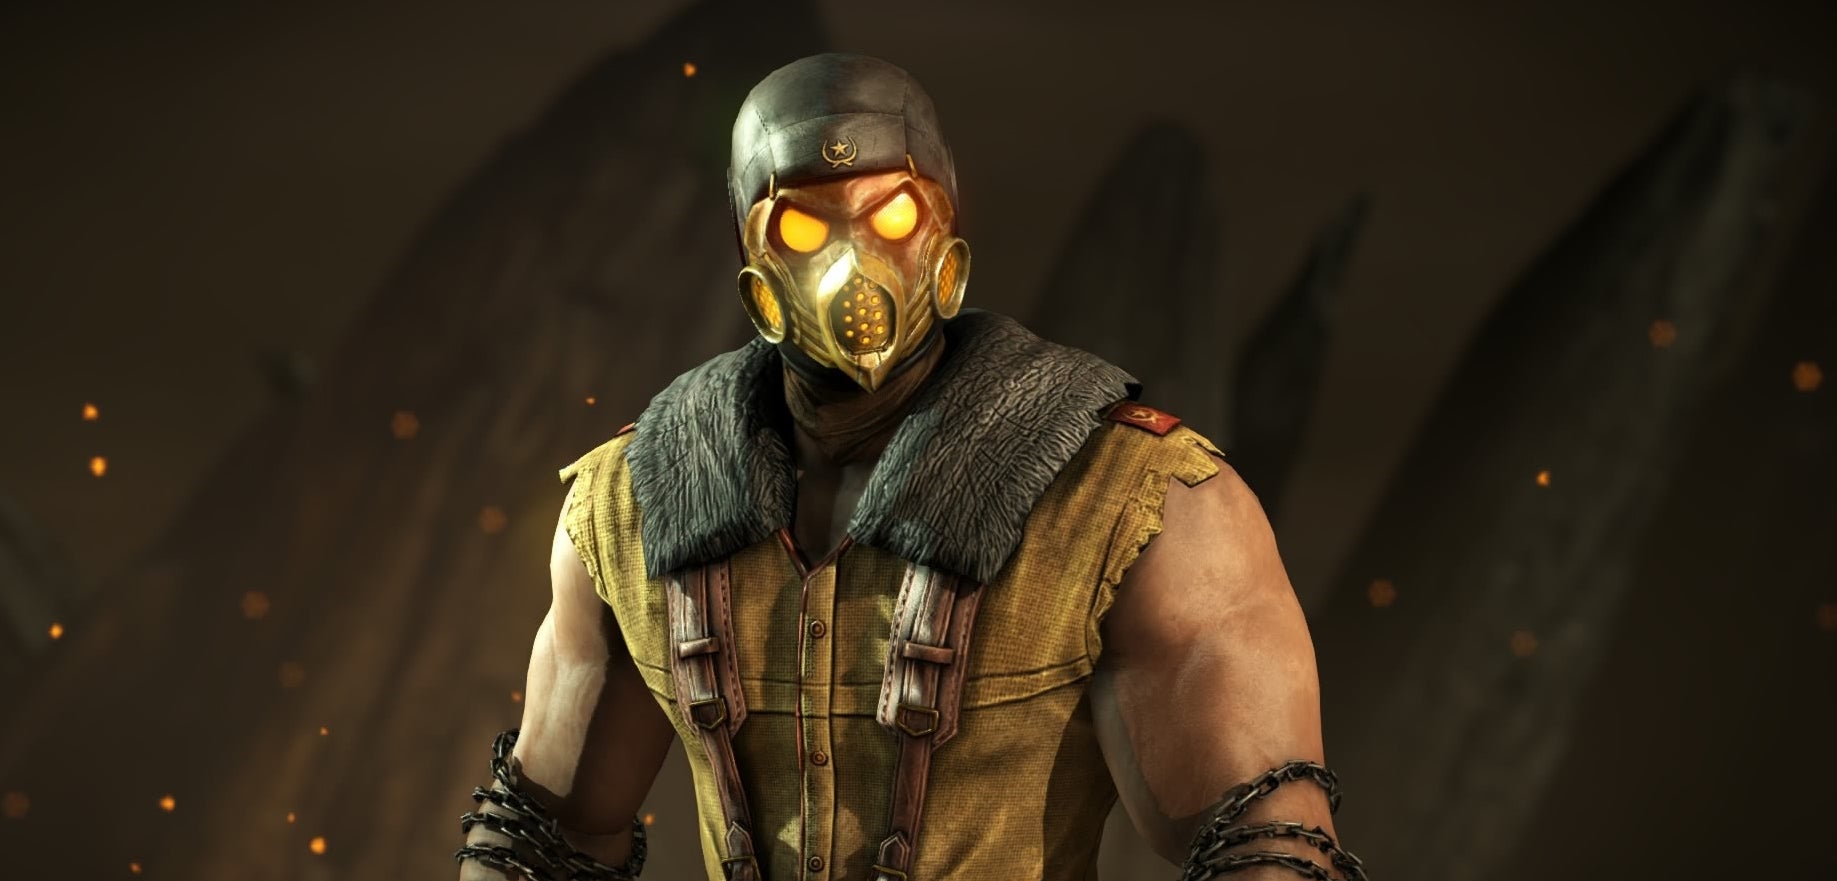 Image for Mortal Kombat 11 tournaments cancelled at last minute over coronavirus concerns